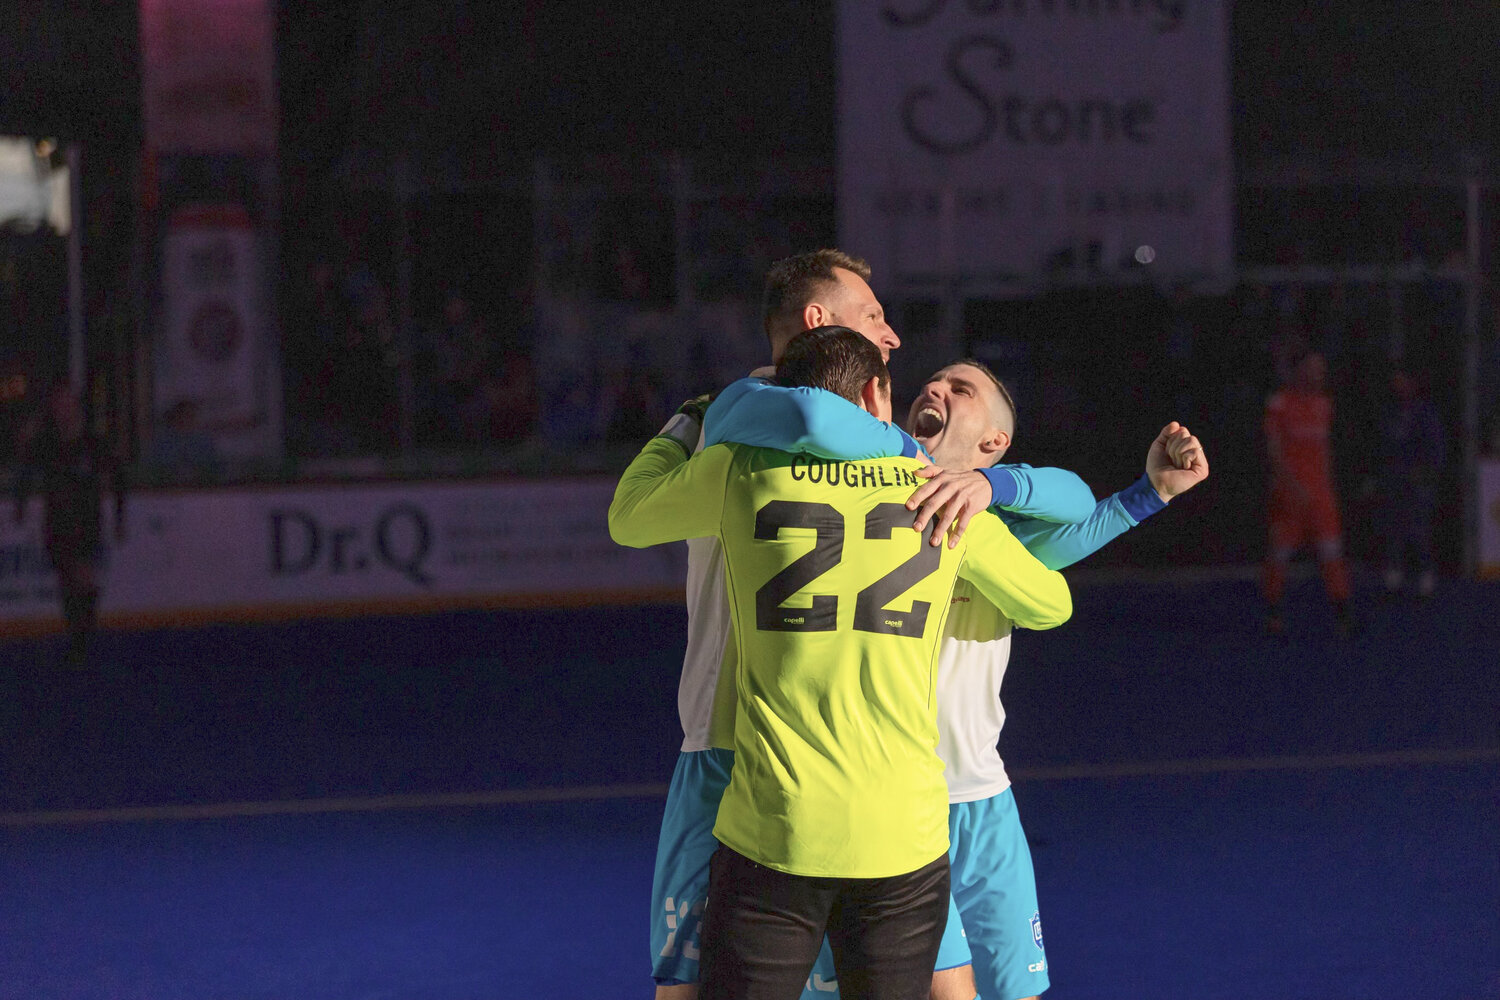 Utica City FC goalkeeper Andrew Coughlin, co-captain Bo Jelovac and Gordy Gurson celebrate during Sunday’s game at the Adirondack Bank Center. Gurson scored on a penalty kick with 3:06 left in overtime to help Utica score a 5-4 win over the Florida Tropics.